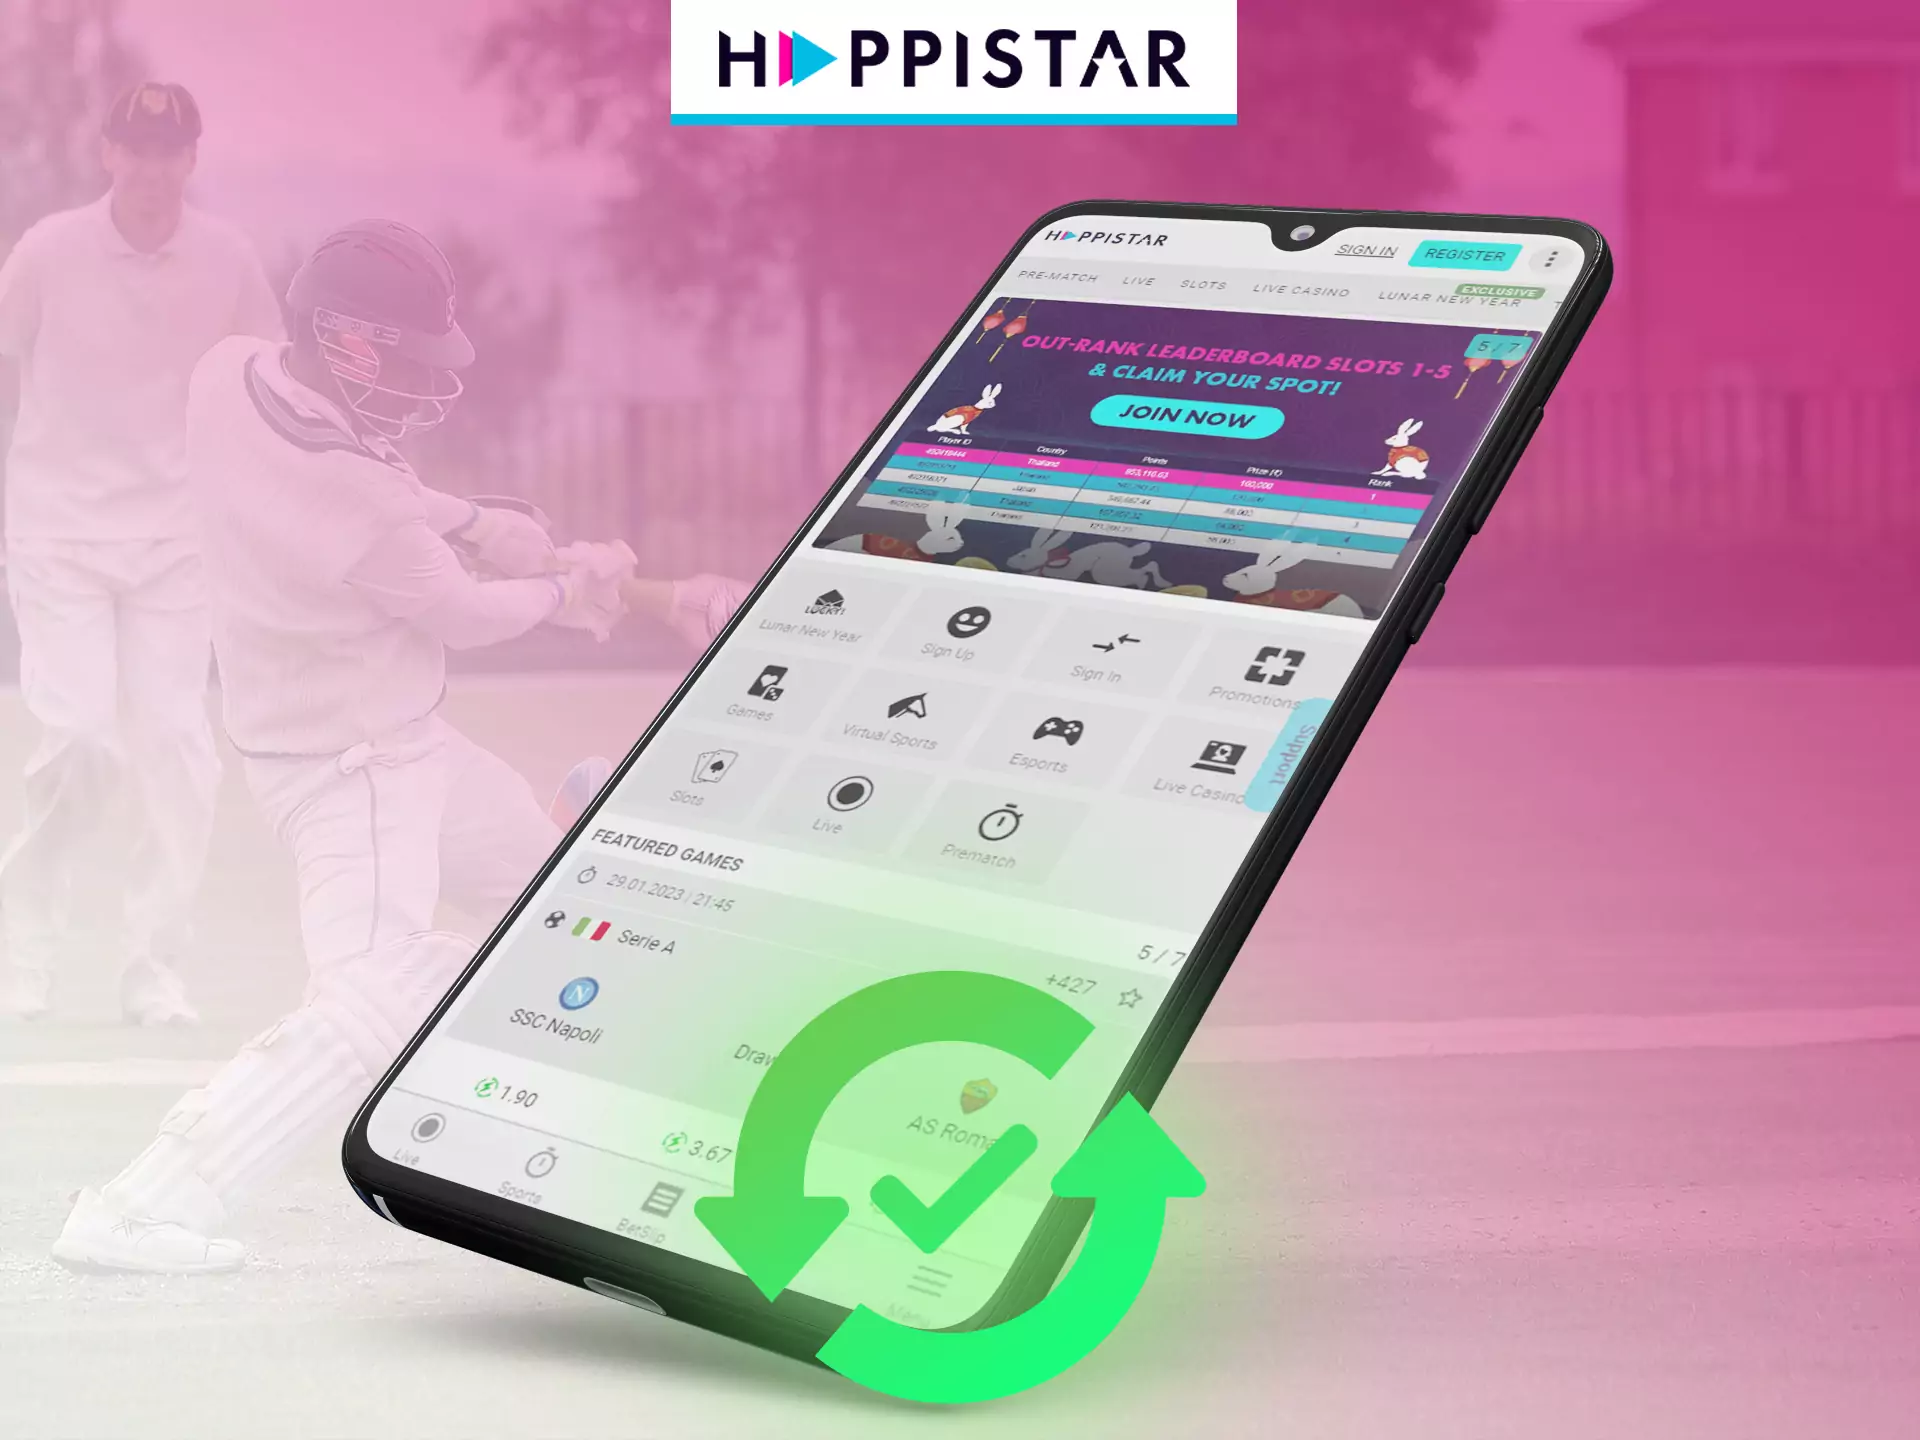 You don't need to update Happistar since there is no app available for devices.